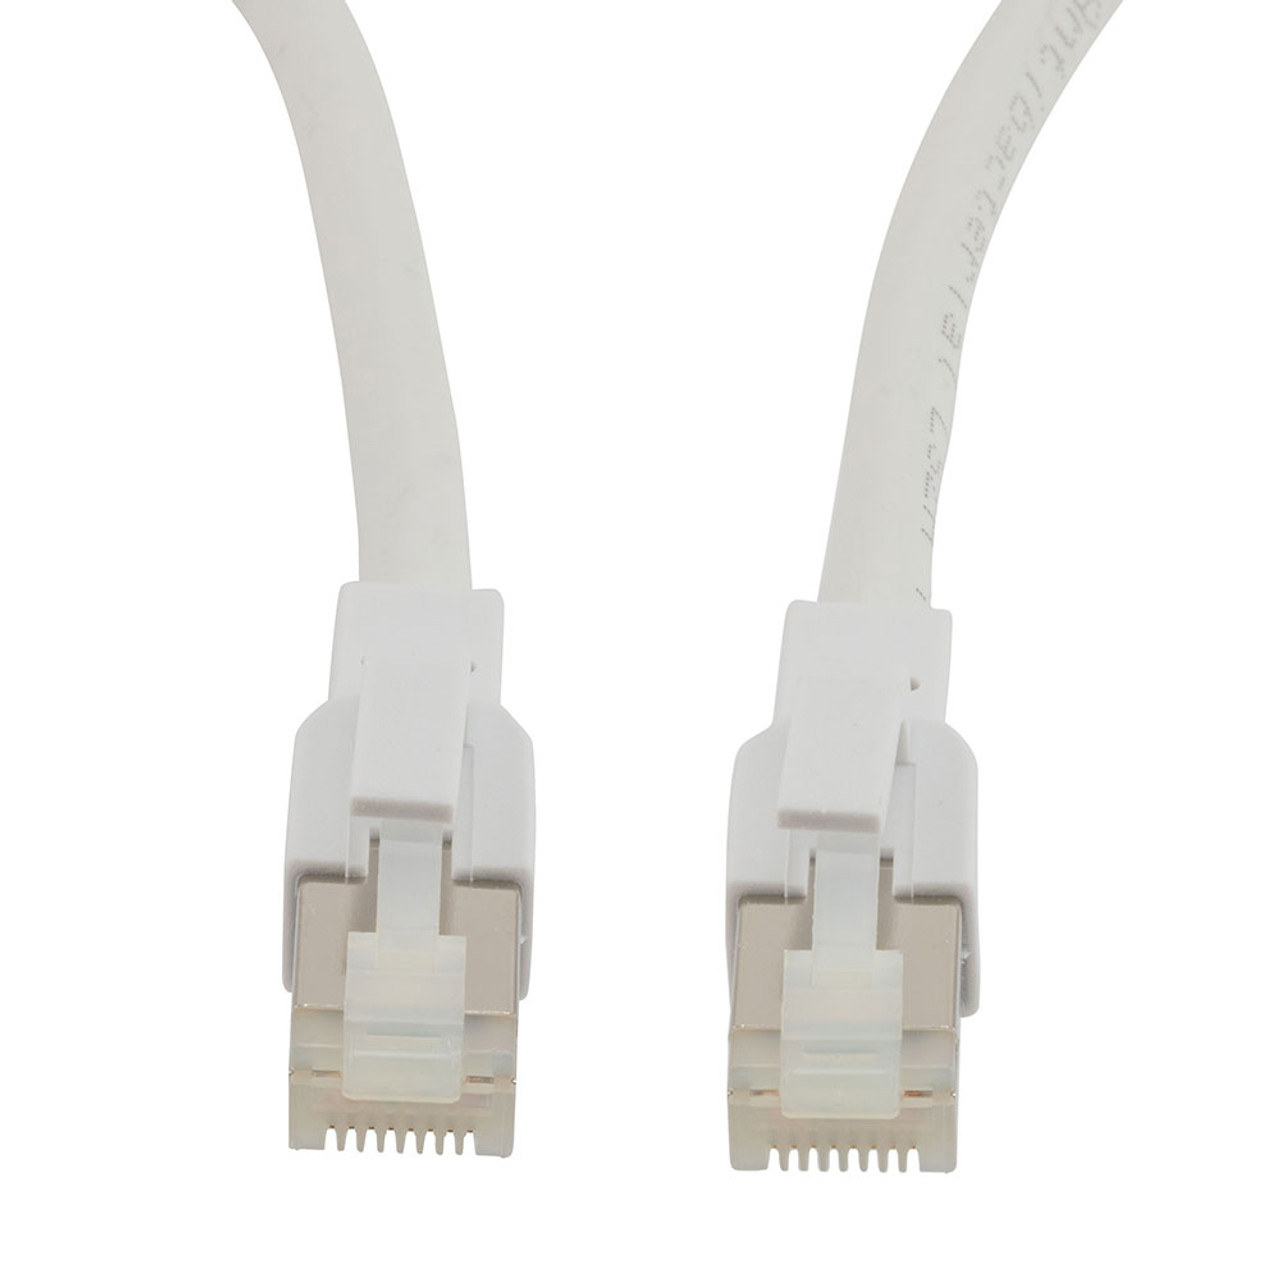 Category 6a 10 Gbps Ethernet Antibacterial Antimicrobial Cable Assembly, RJ45 Male/Plug, S/FTP, CM LSZH, 26 AWG, ANTIBACTERIAL LSZH, White, 1 FT